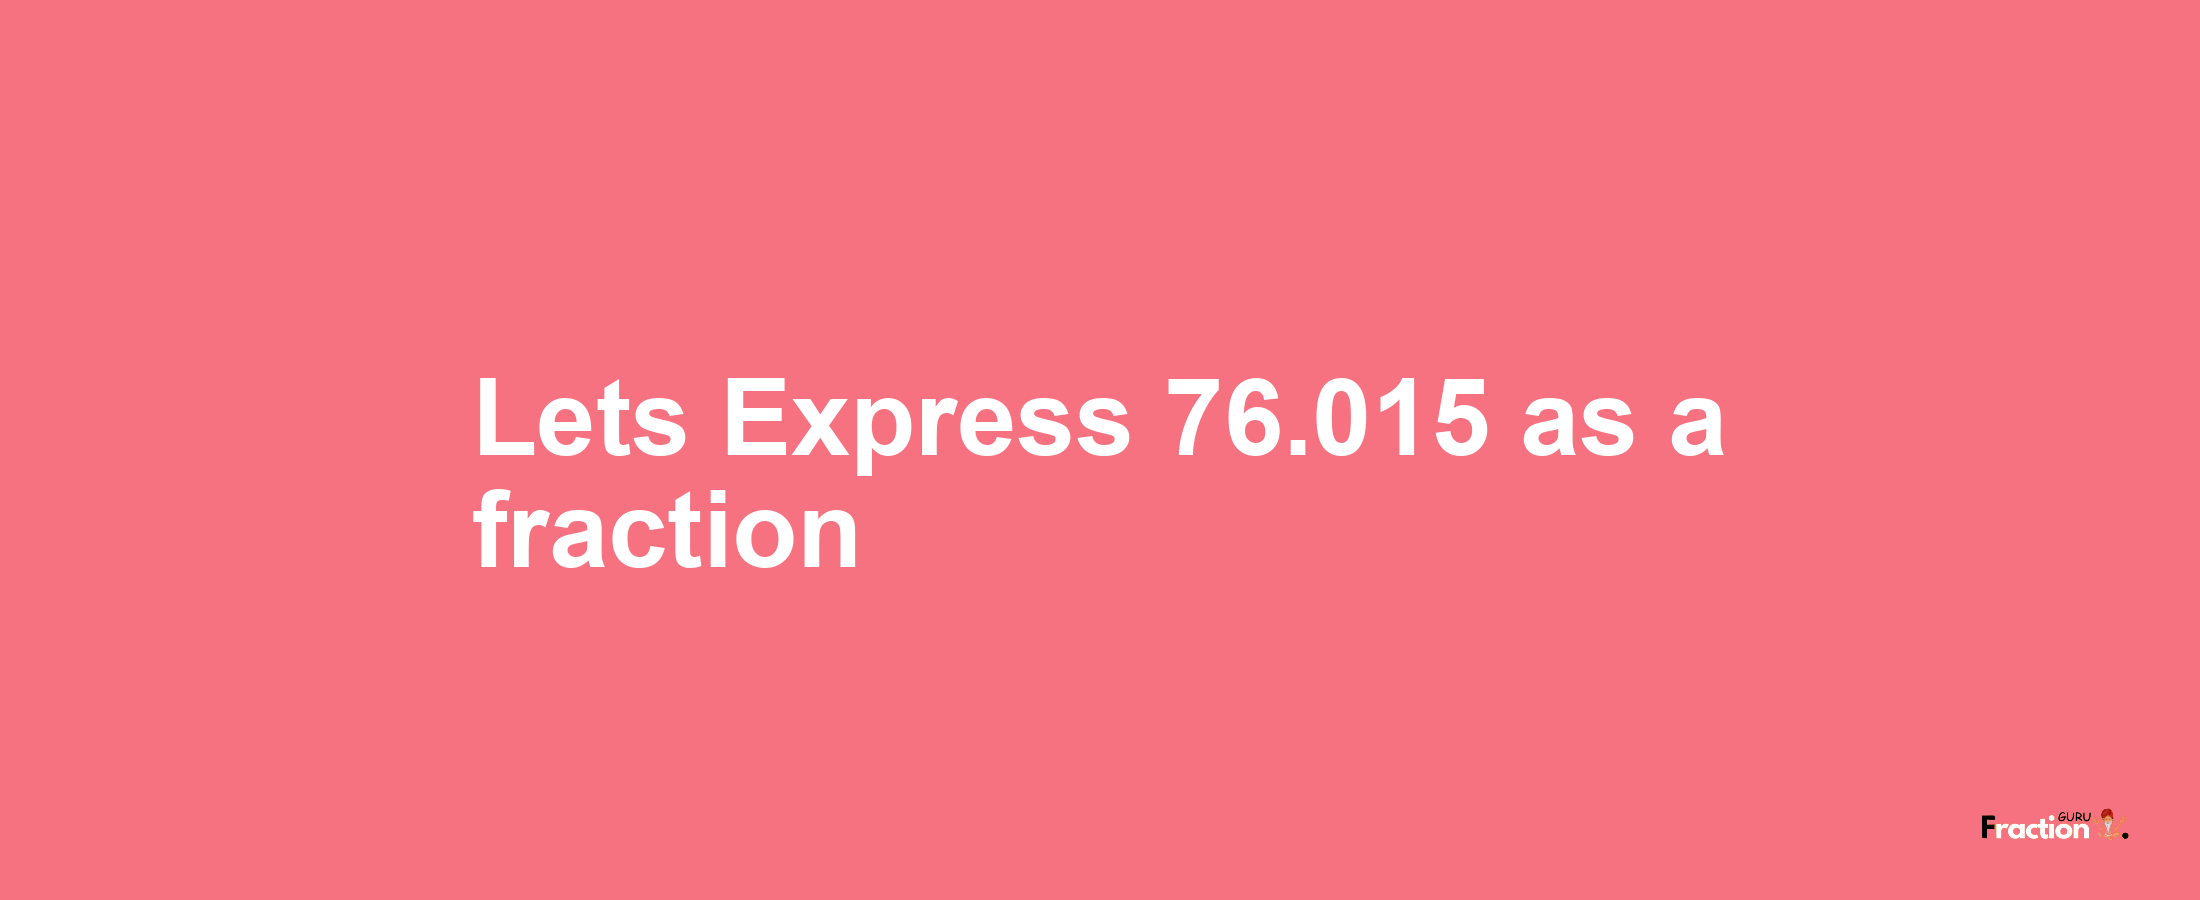 Lets Express 76.015 as afraction